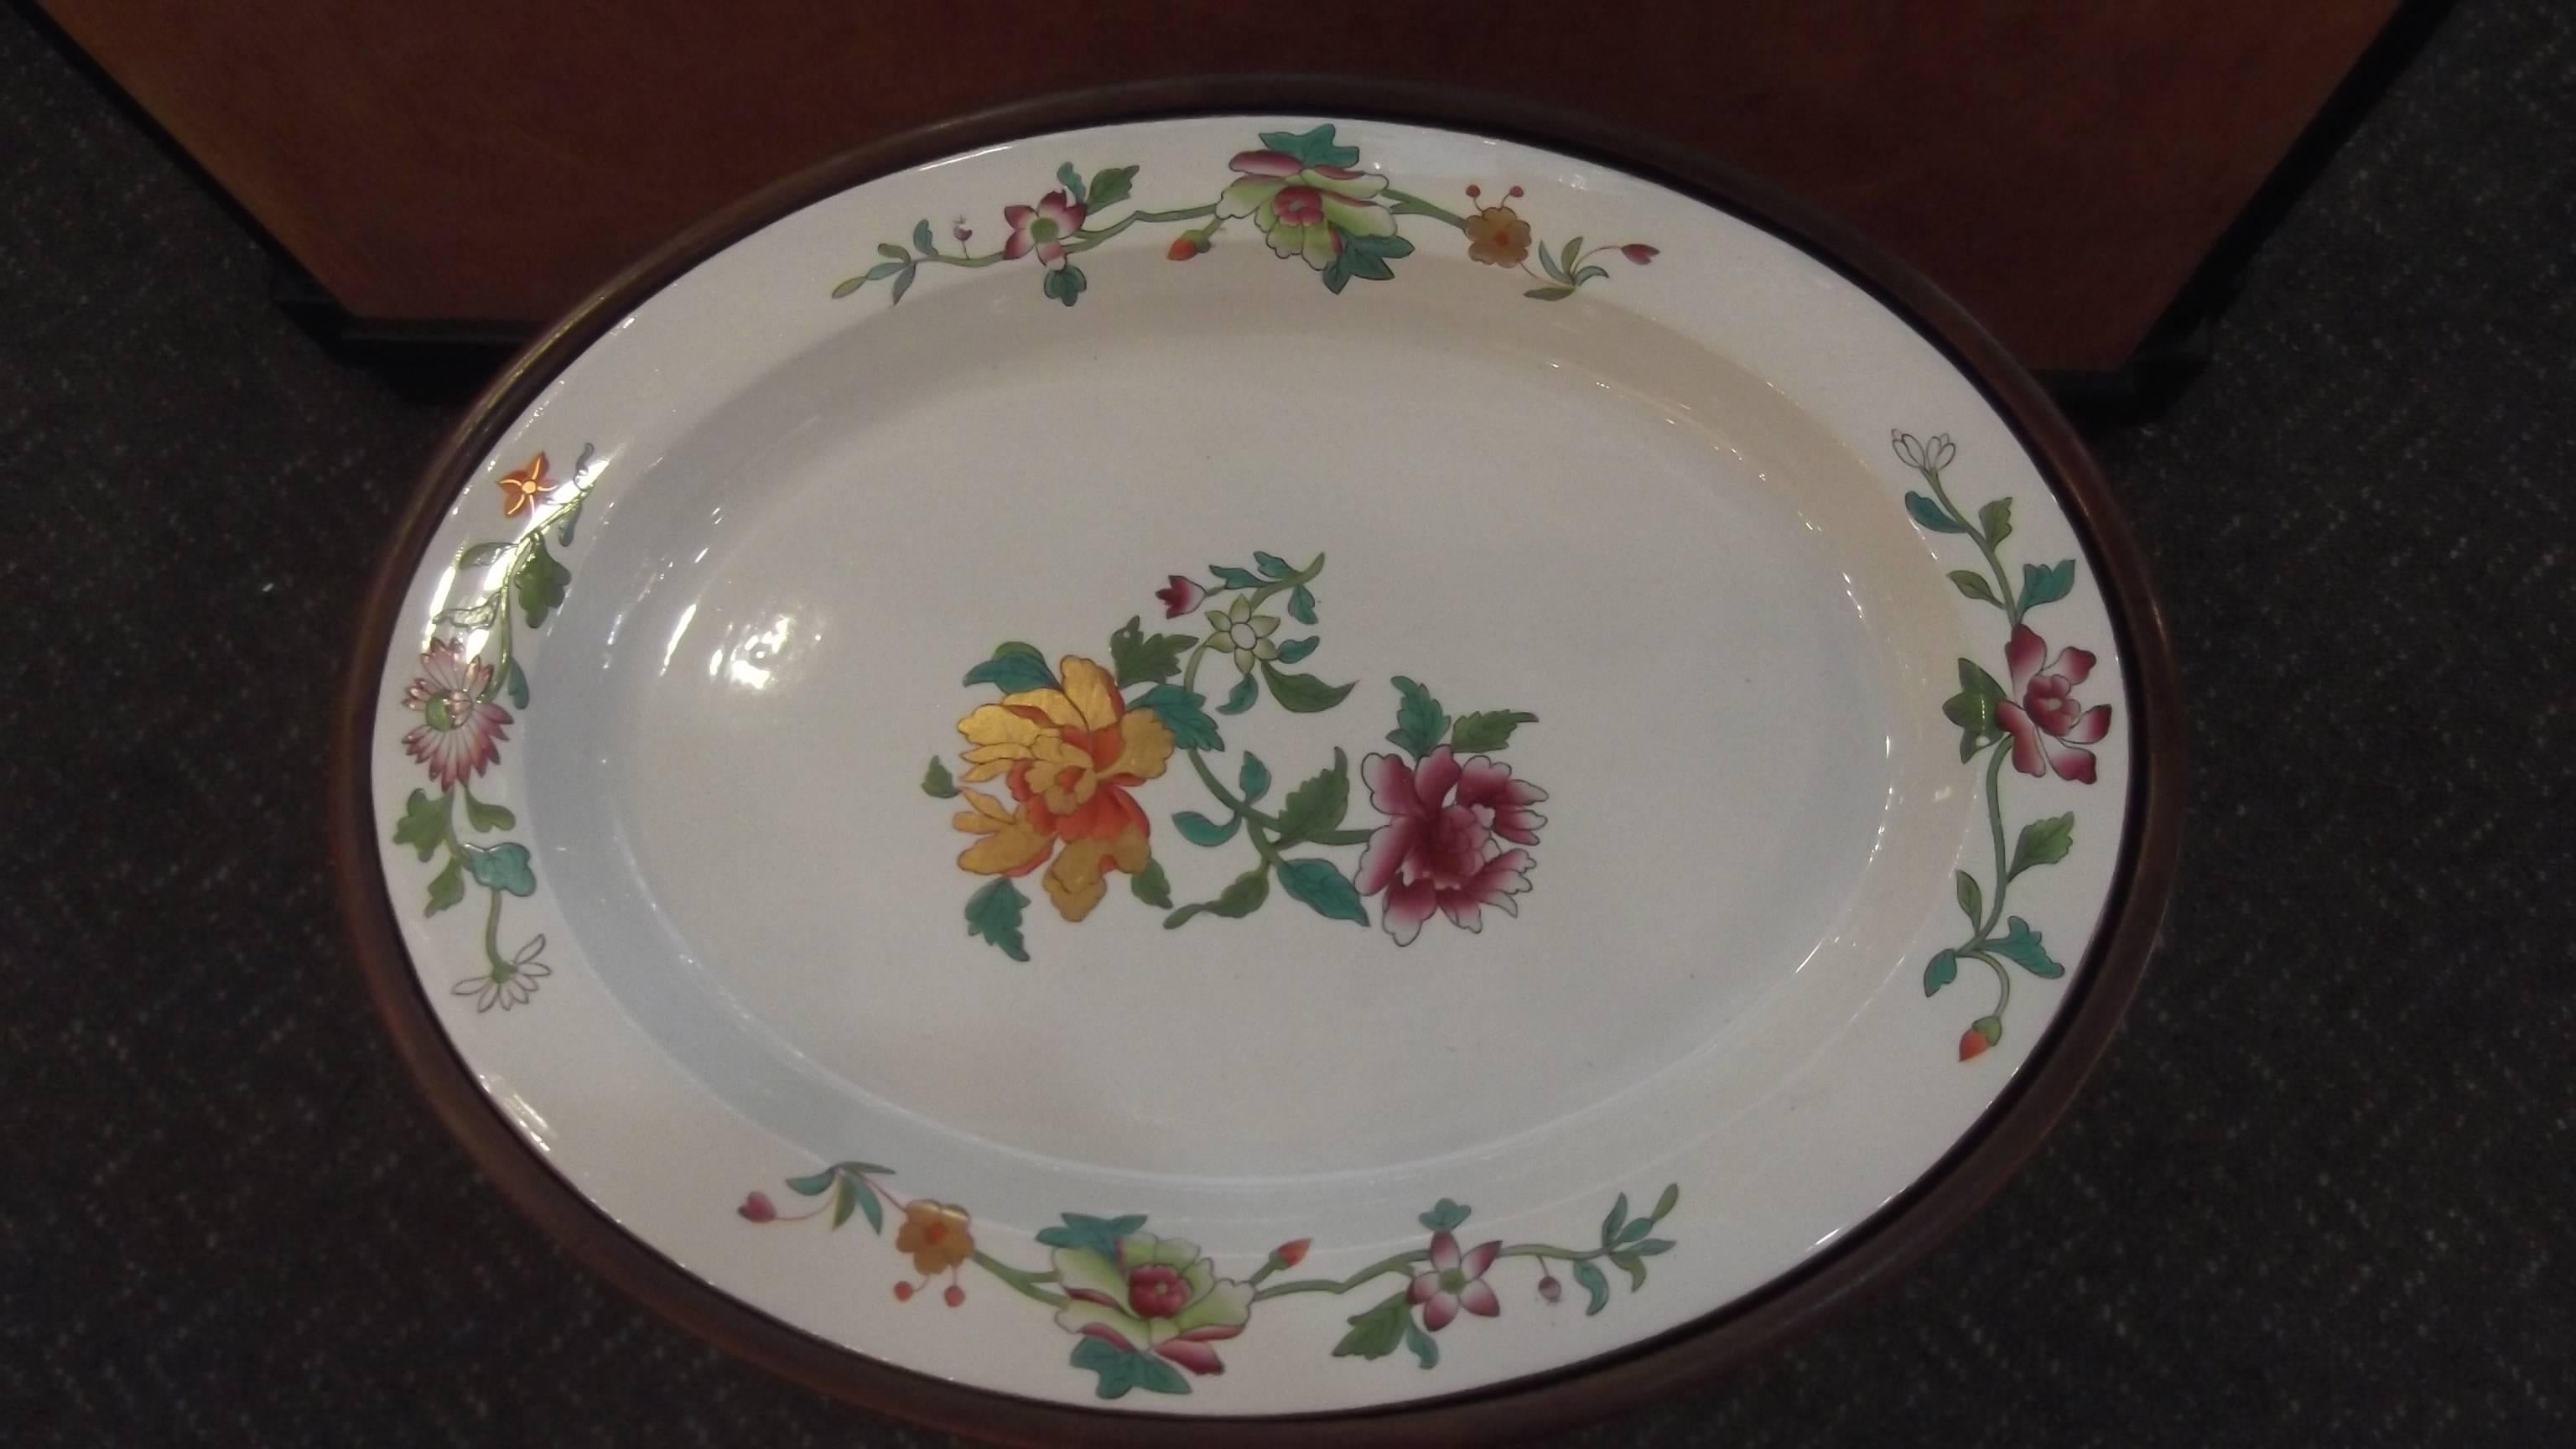 Chinese Export Early 19th Century English Porcelain Platter on Stand by Coalport and Garrett